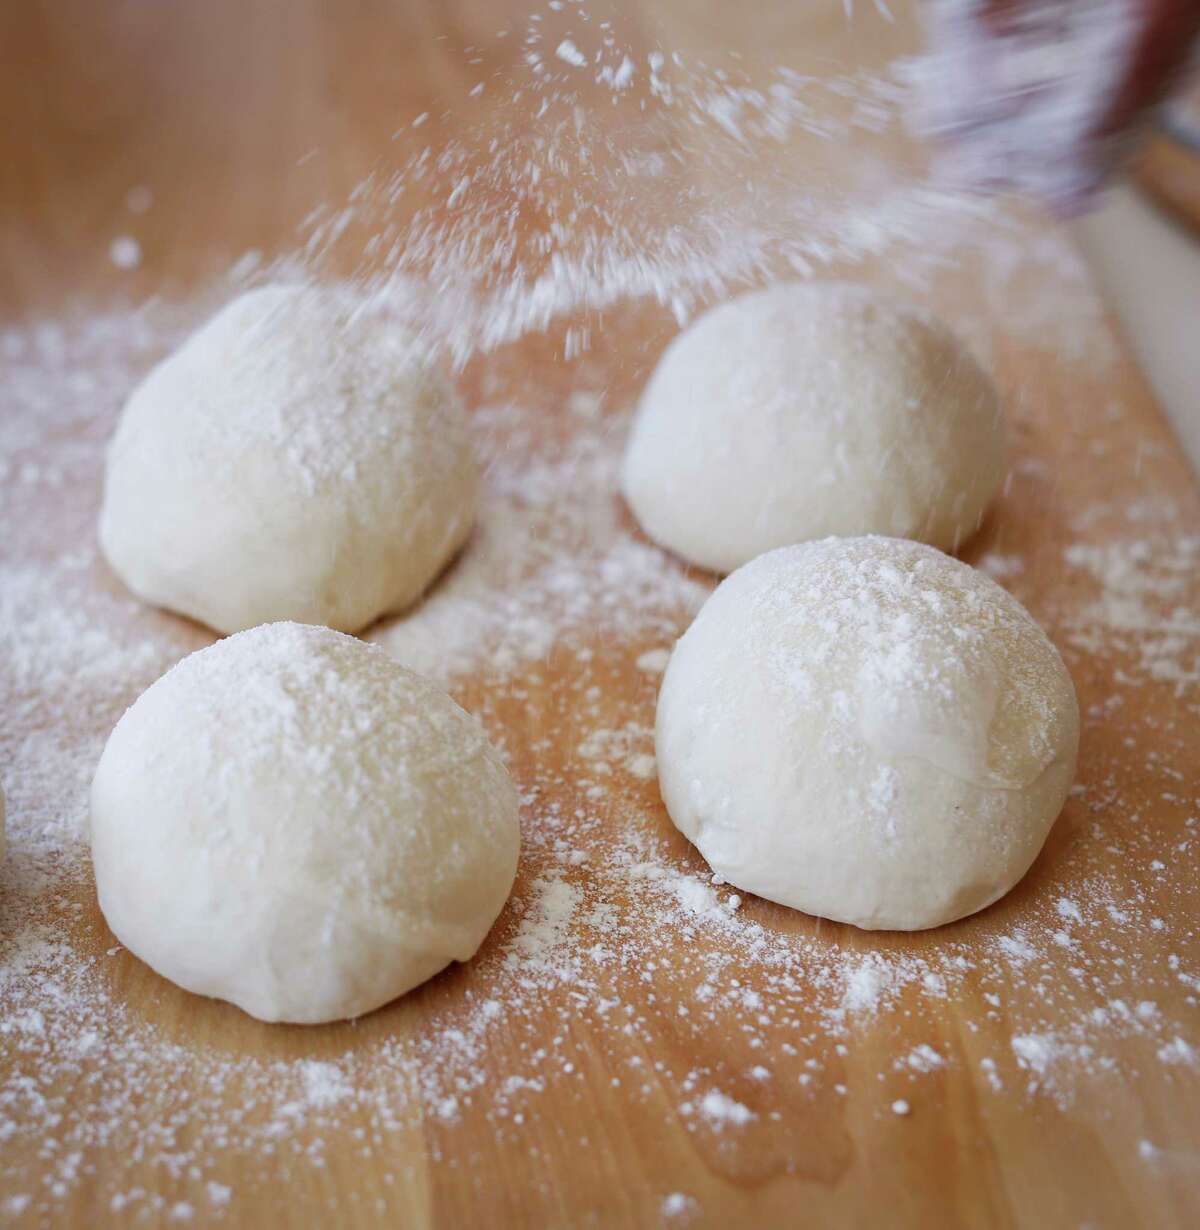 Reem Assil dusts balls of dough with flour for man’oushe in her Oakland kitchen.